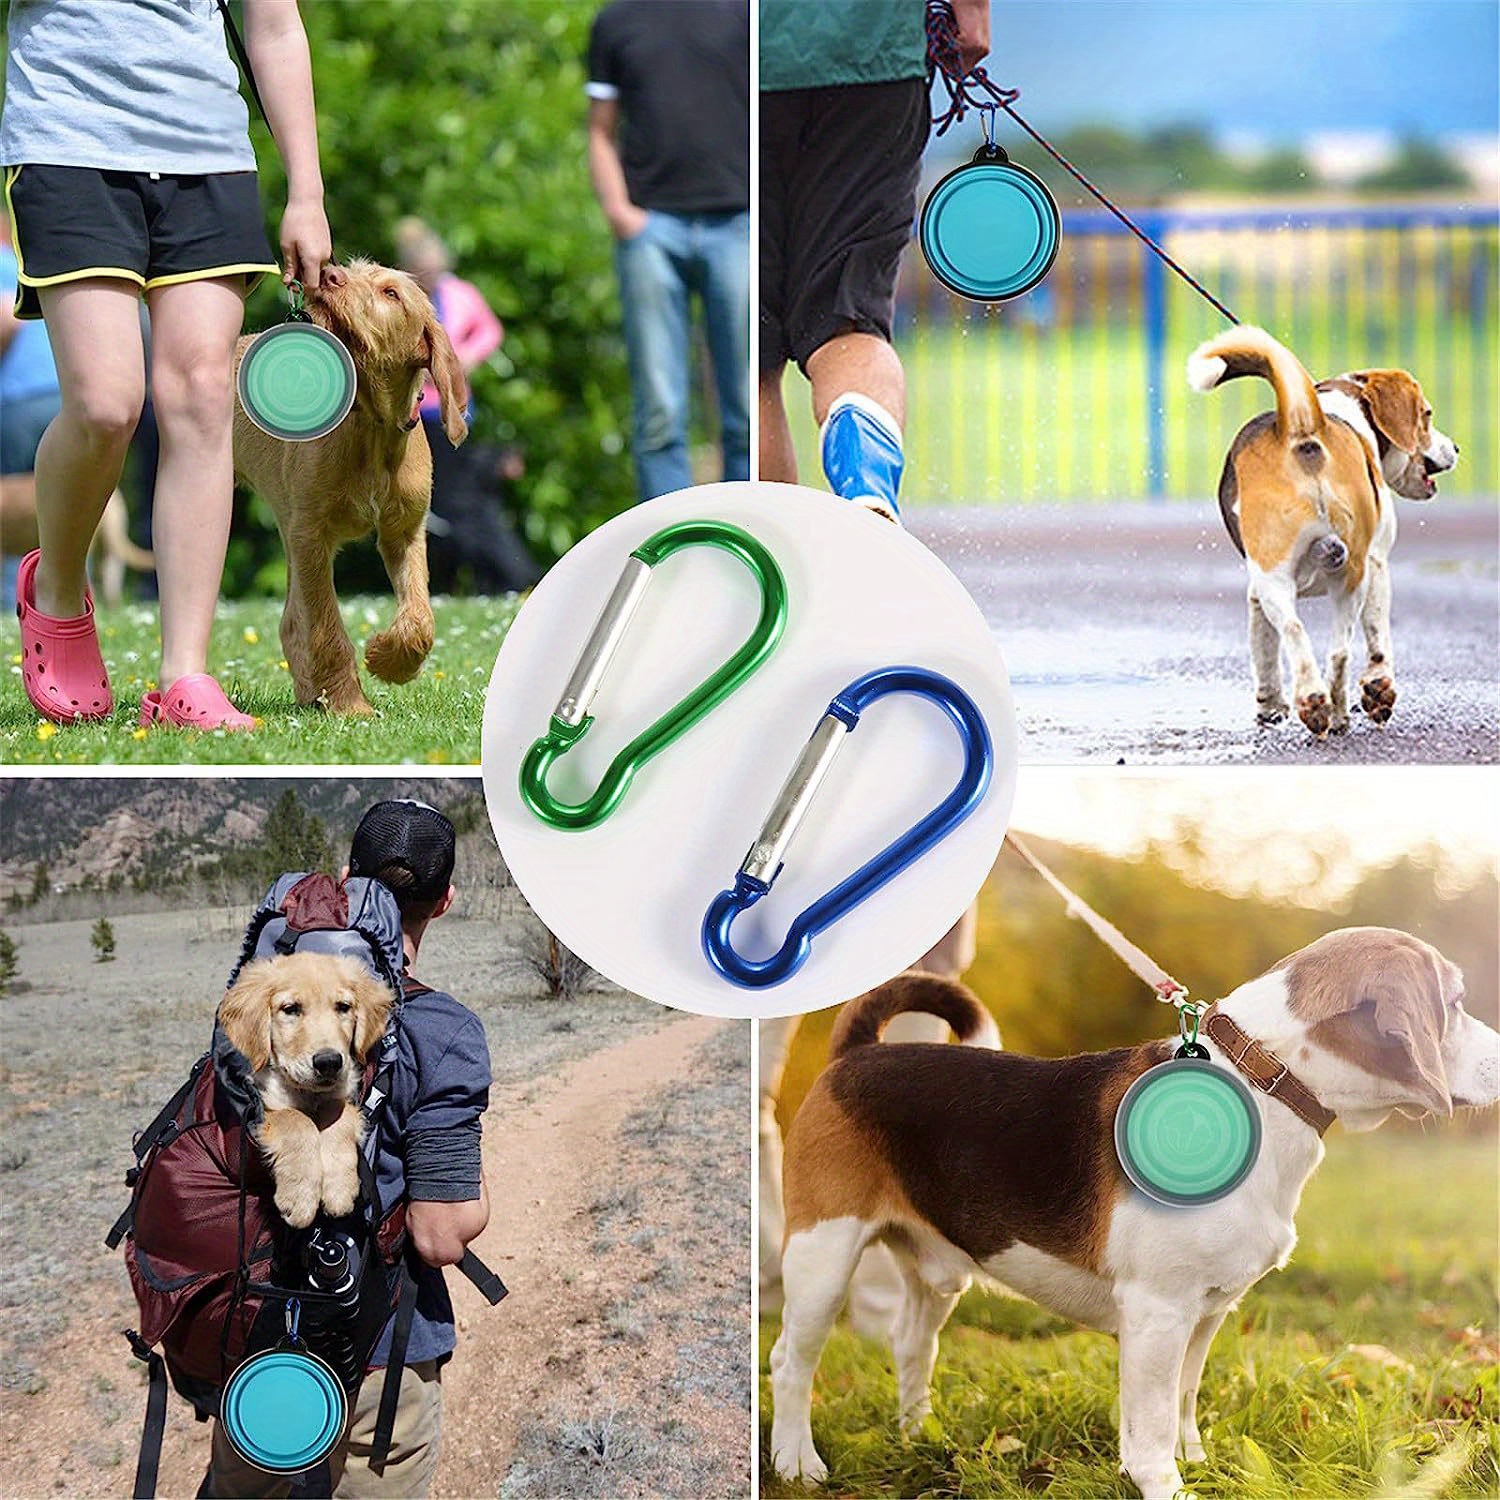 

1pc Collapsible Dog Bowl With Lid And Carabiner, Portable Silicone Dog Folding Bowl, Portable Dog Feeder Bowl For Food And Water